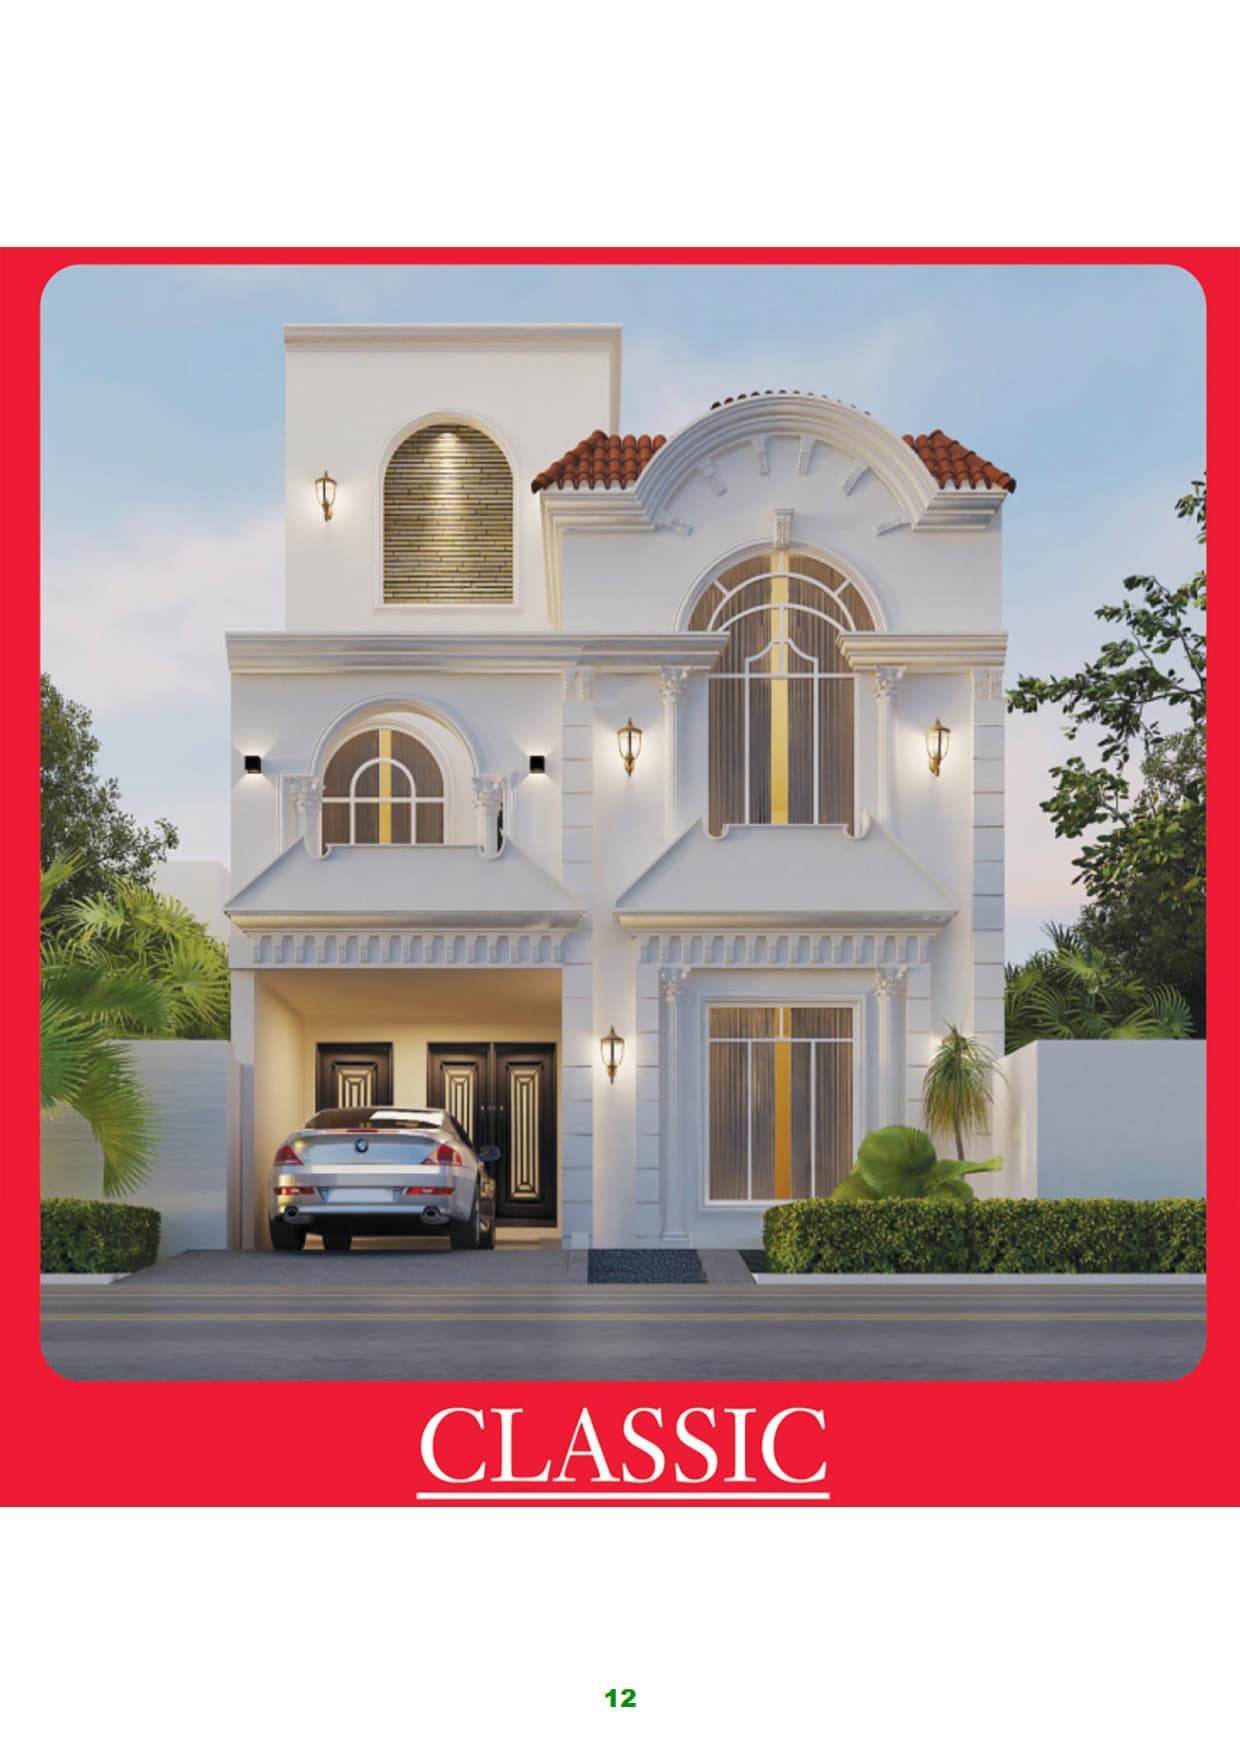 Nelson Classic Homes